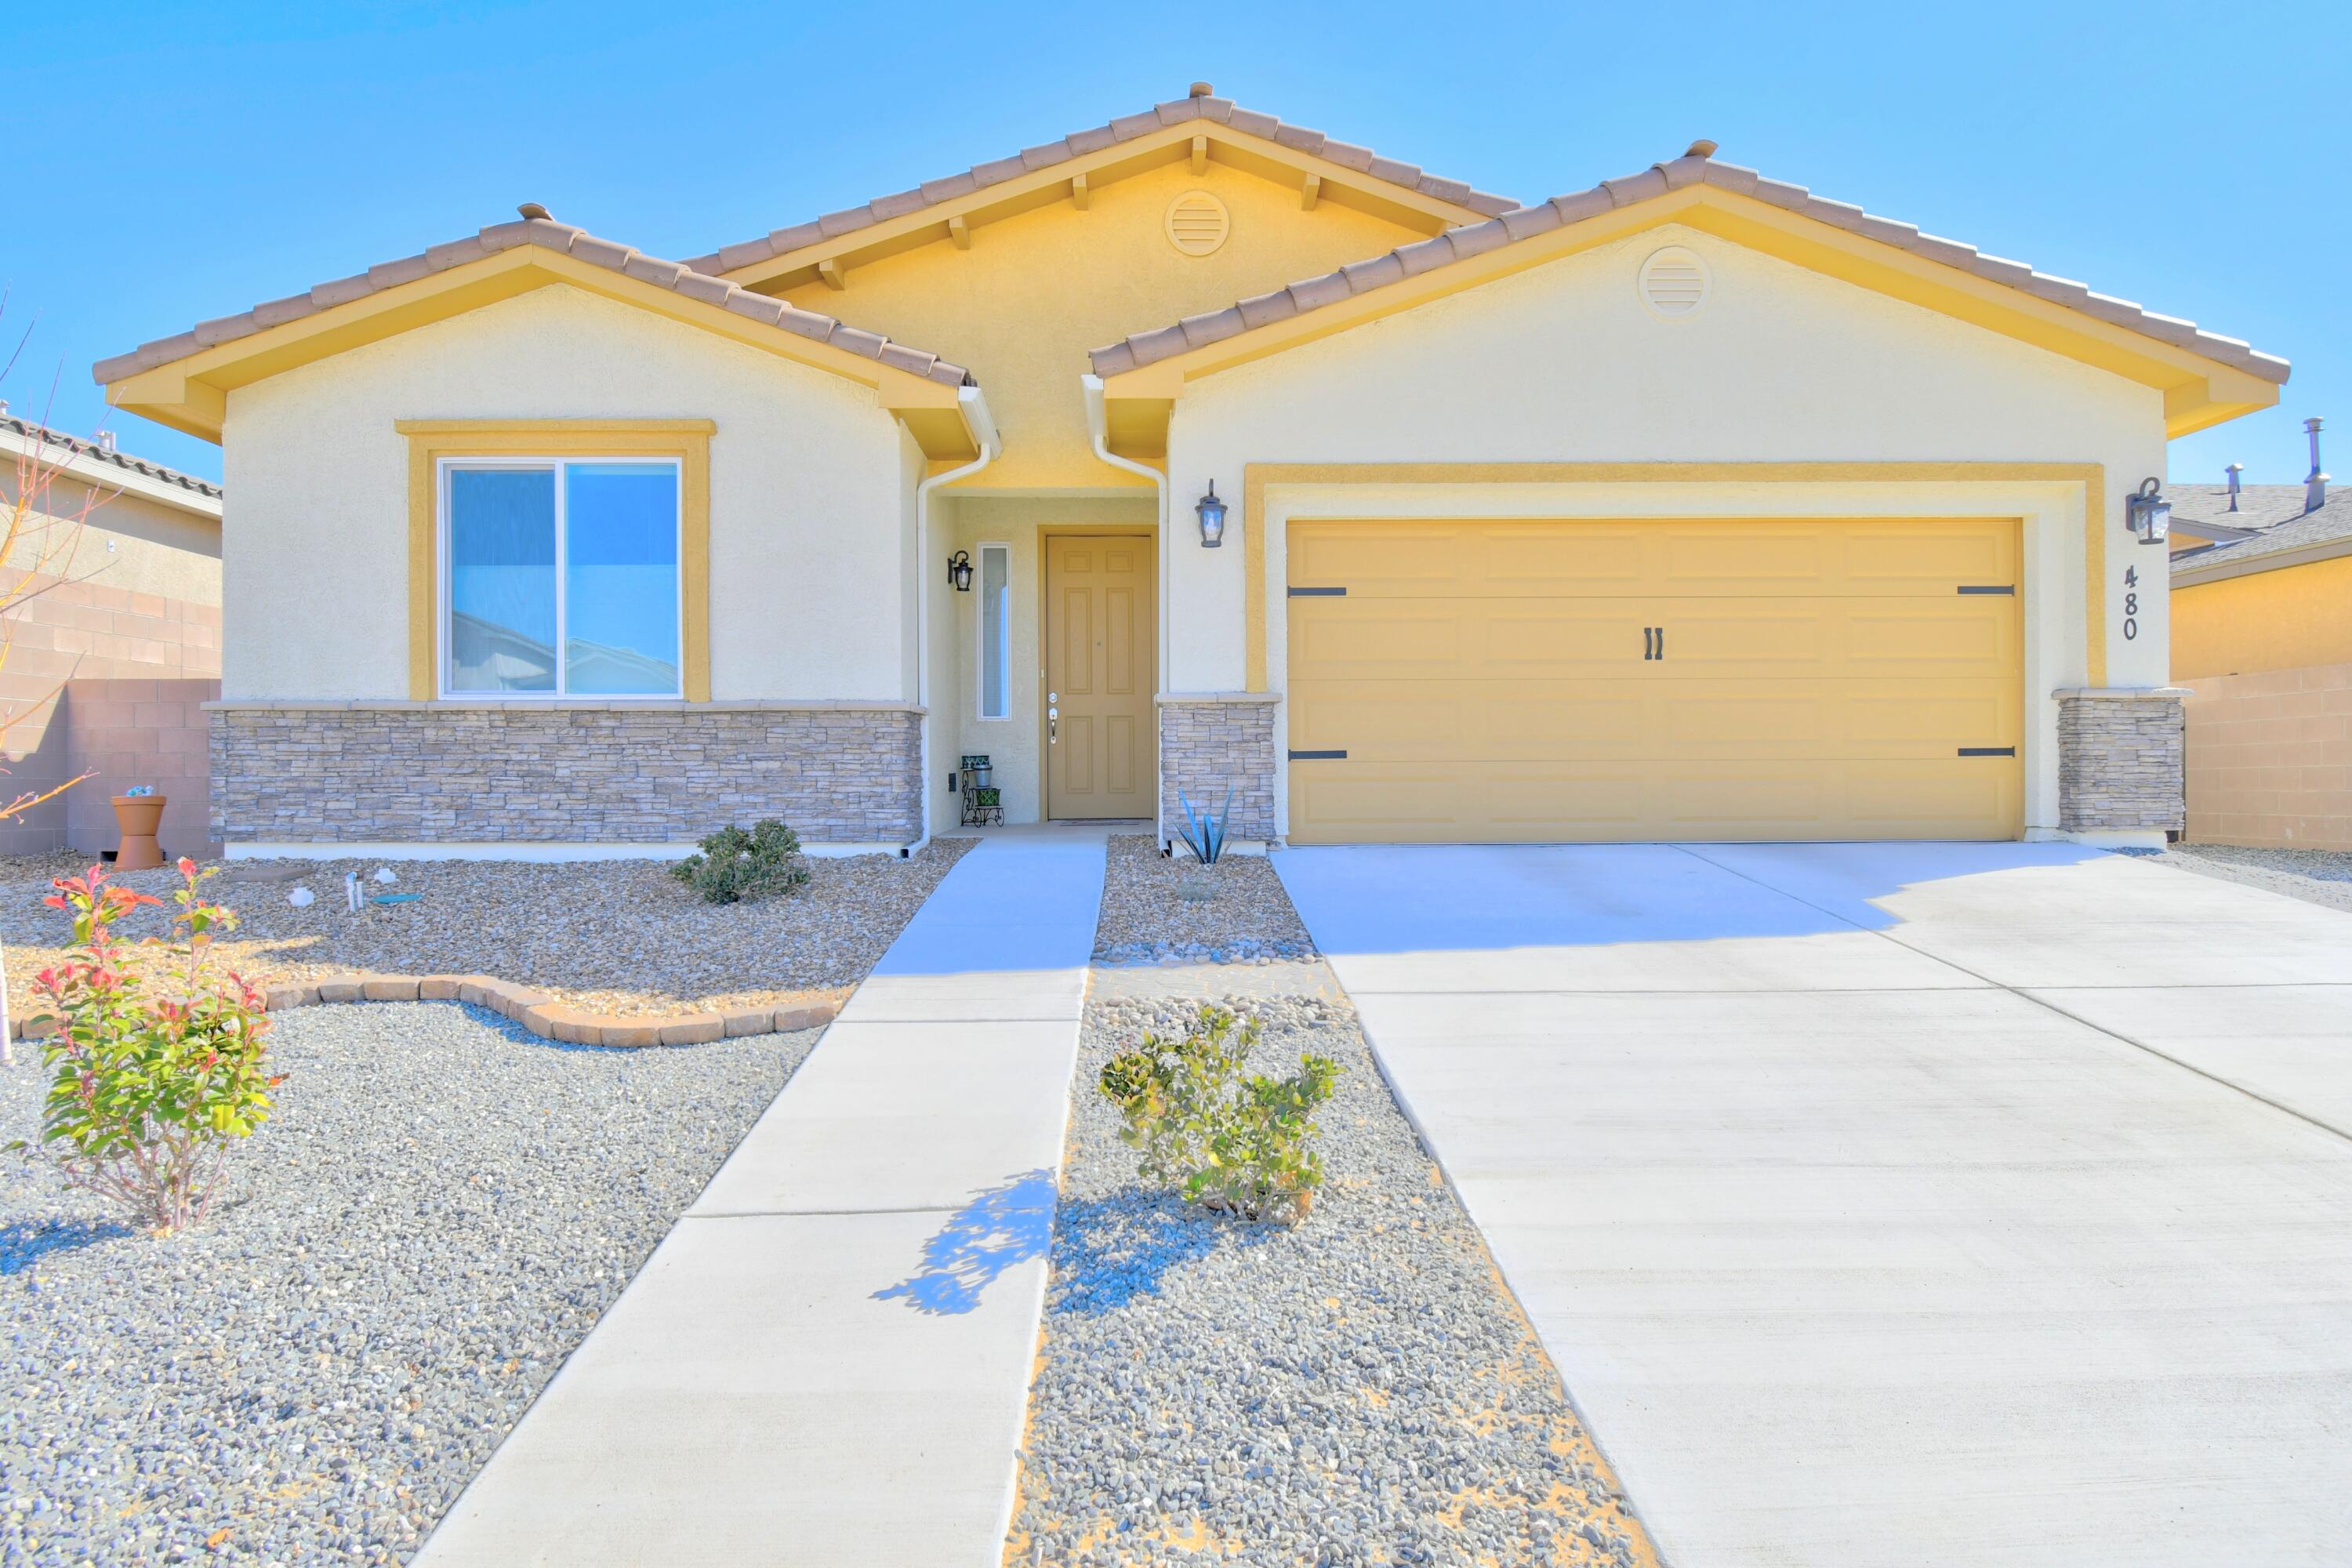 BETTER THAN NEW and an Unbelievable Price! Jubilee is a 55+ community just a short drive from Albuquerque. Built in 2022, home features include an open floorplan w/  2 bdrms plus an office , upgraded cabinets, granite counter tops, upscale window coverings, a finished garage, large lot, low maintenance  landscape w/ turf, plants, extended patio and bubblers. Priced below original cost plus $21,000 added upgrades including kitchen backsplash, dog door, cellular shade window coverings, backyard landscaping, kitchen faucet, 5 ceiling fans and 3 hall lights. Meticulously maintained and priced for a quick sale. Gated community w/unmatched amenities.10,000+ sq.ft club house, fitness room, top work out equipment, pub room, arts + craft room, heated pool, spa, bocce, tennis-pickle ball court.